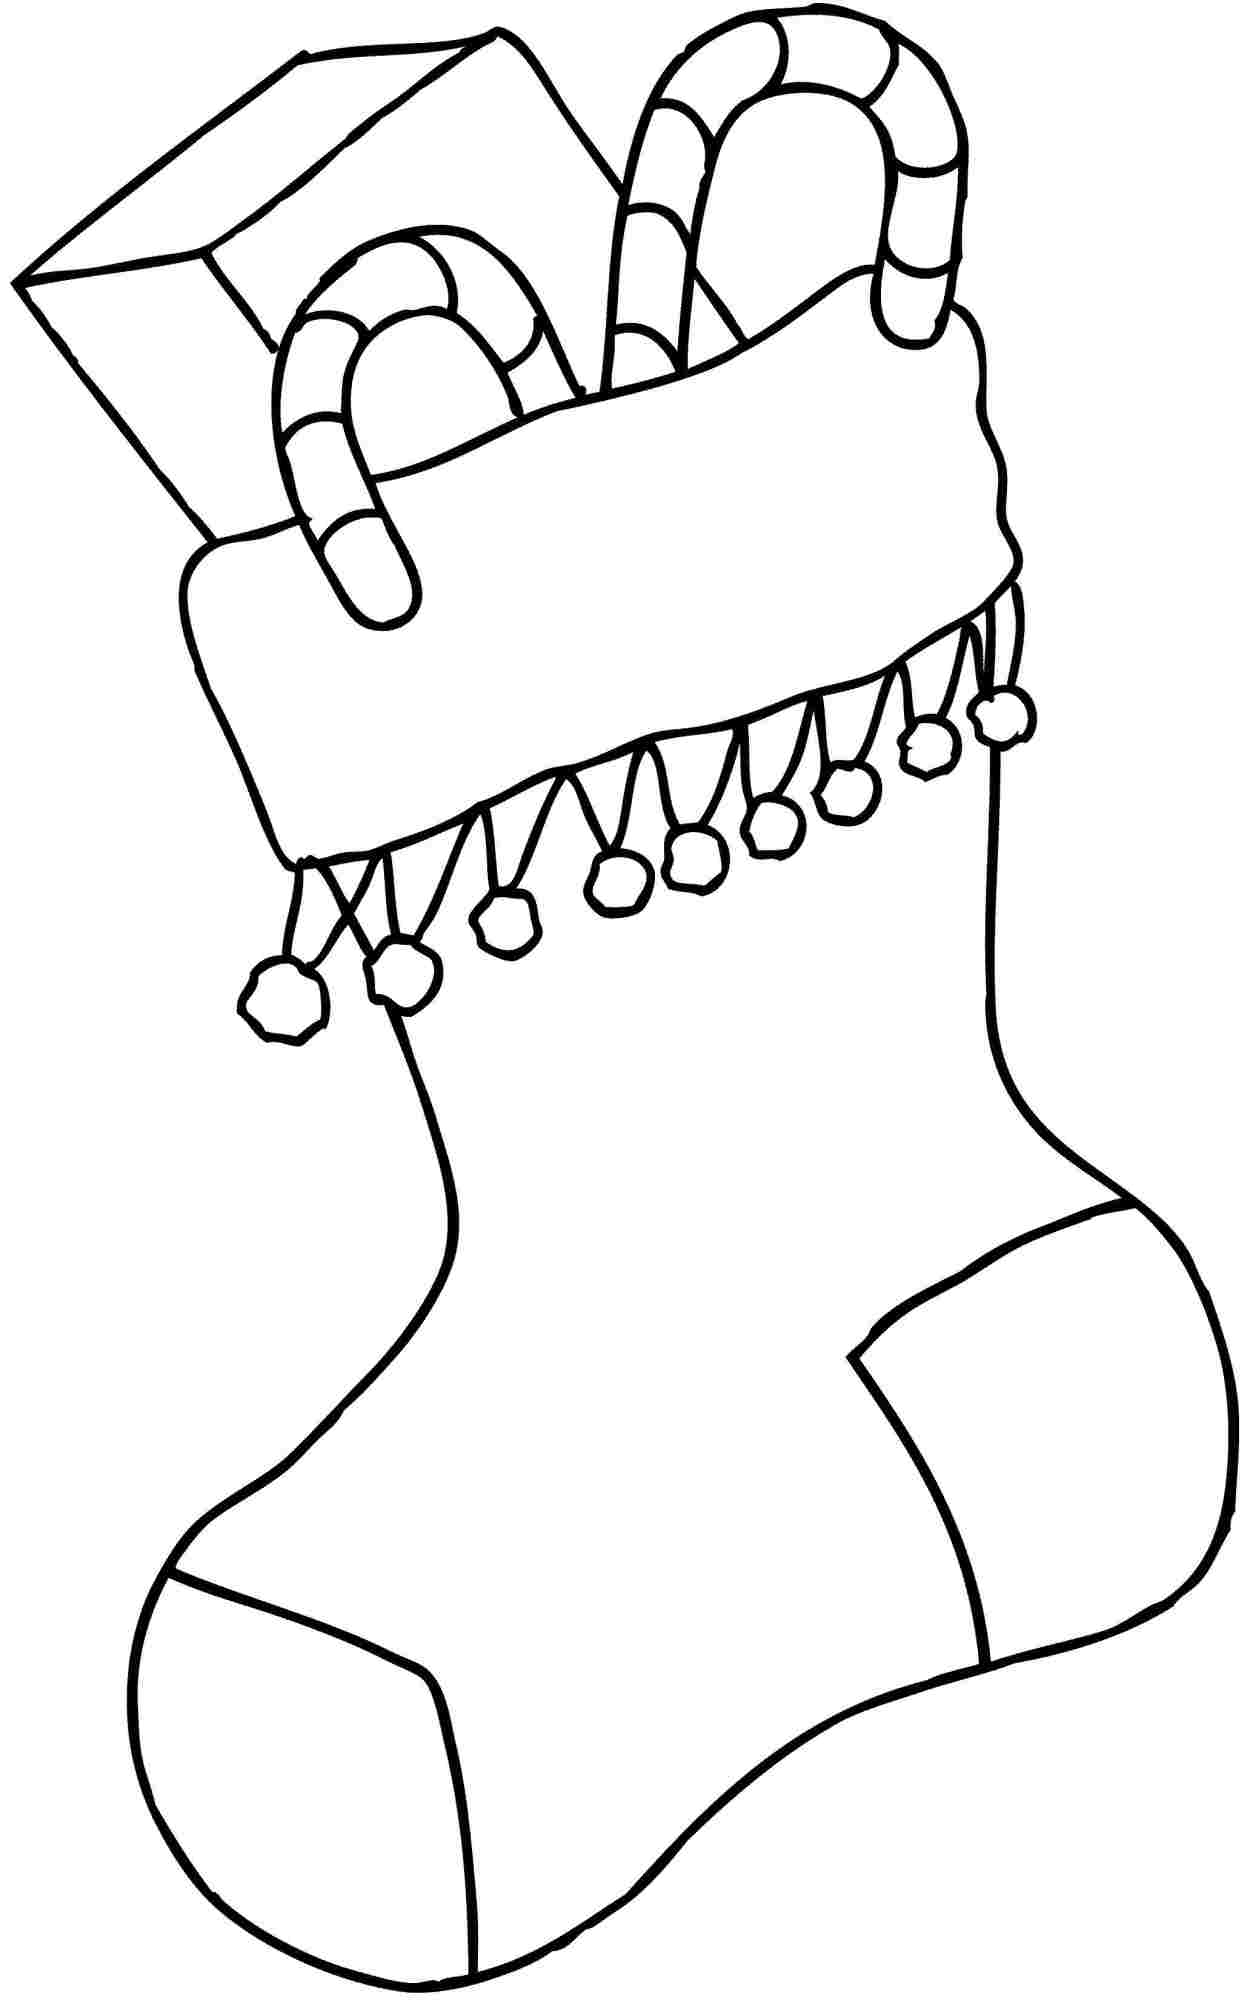 Candy Canes Christmas Stocking Coloring Pages